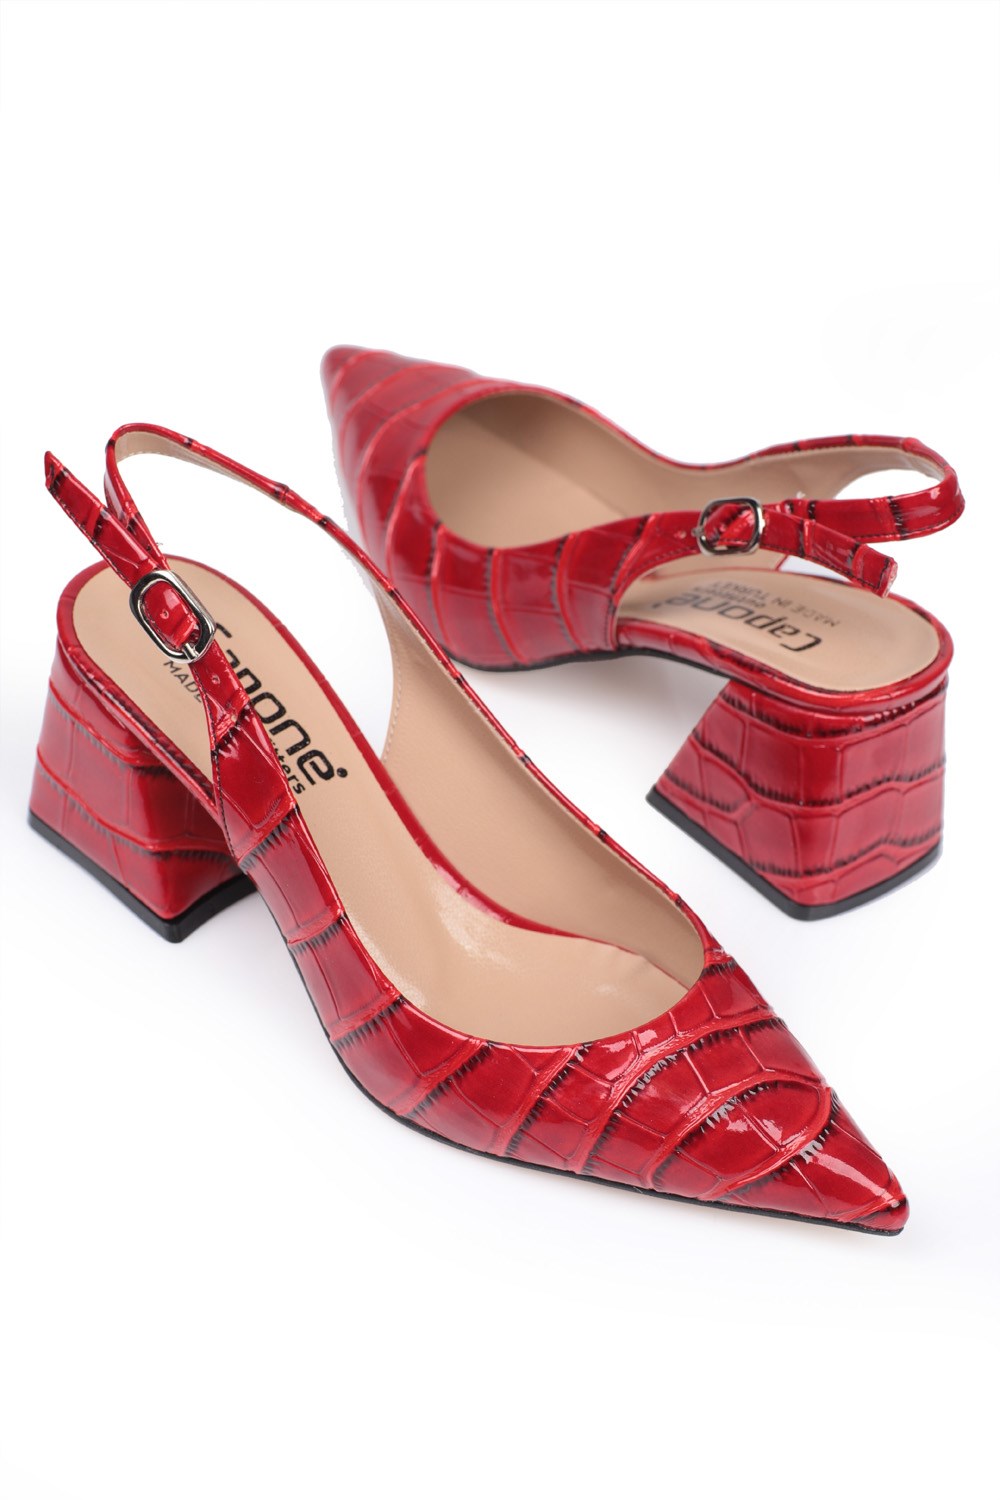 Capone Block Heel Slingback Women Red Shoes | caponeoutfitters.com